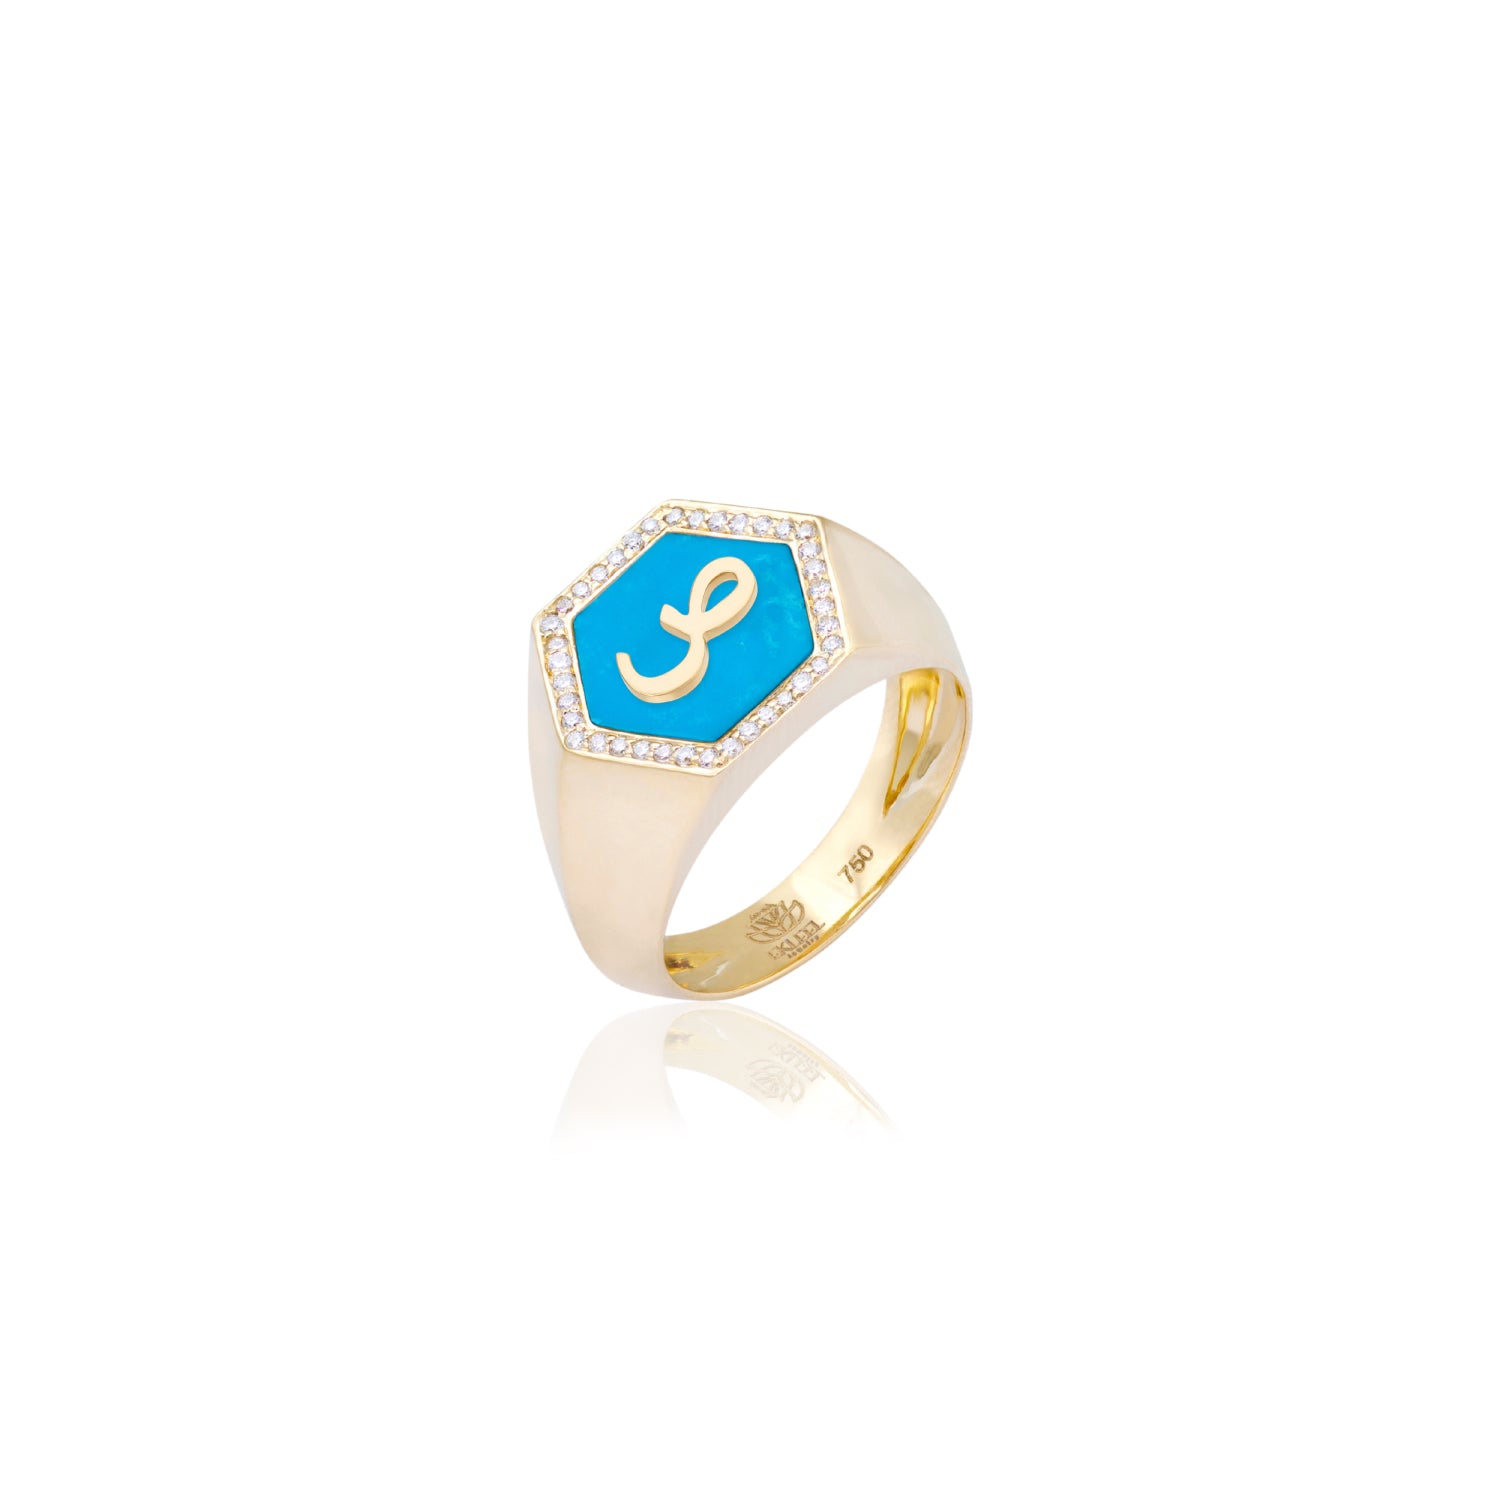 Qamoos 2.0 Letter ص Turquoise and Diamond Signet Ring in Yellow Gold